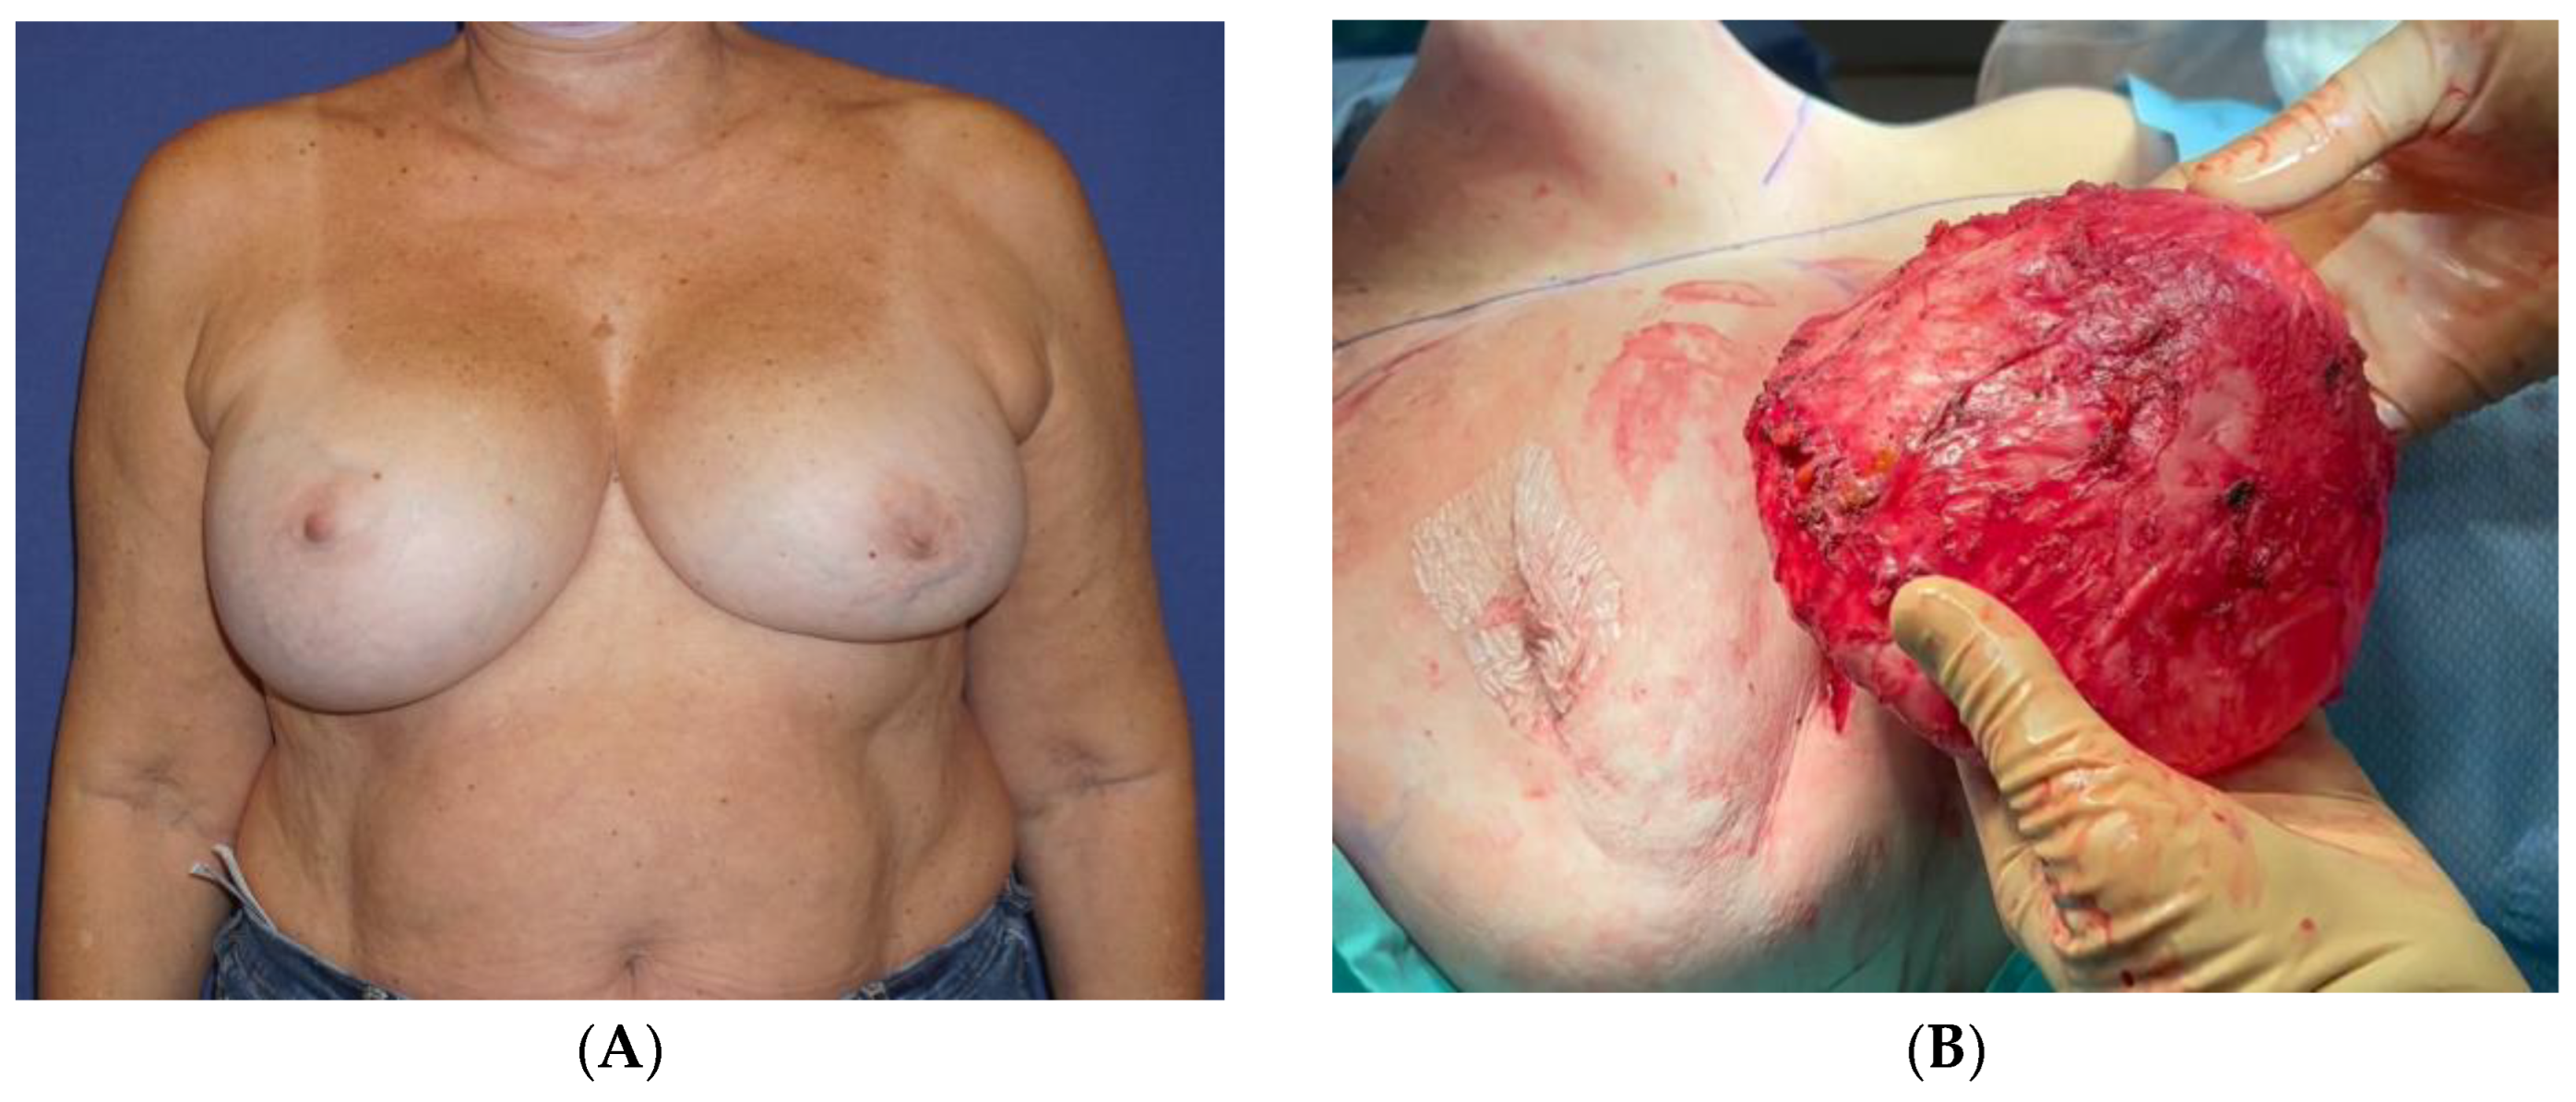 Breast Implant-Associated Anaplastic Large Cell Lymphoma (BIA-ALCL)